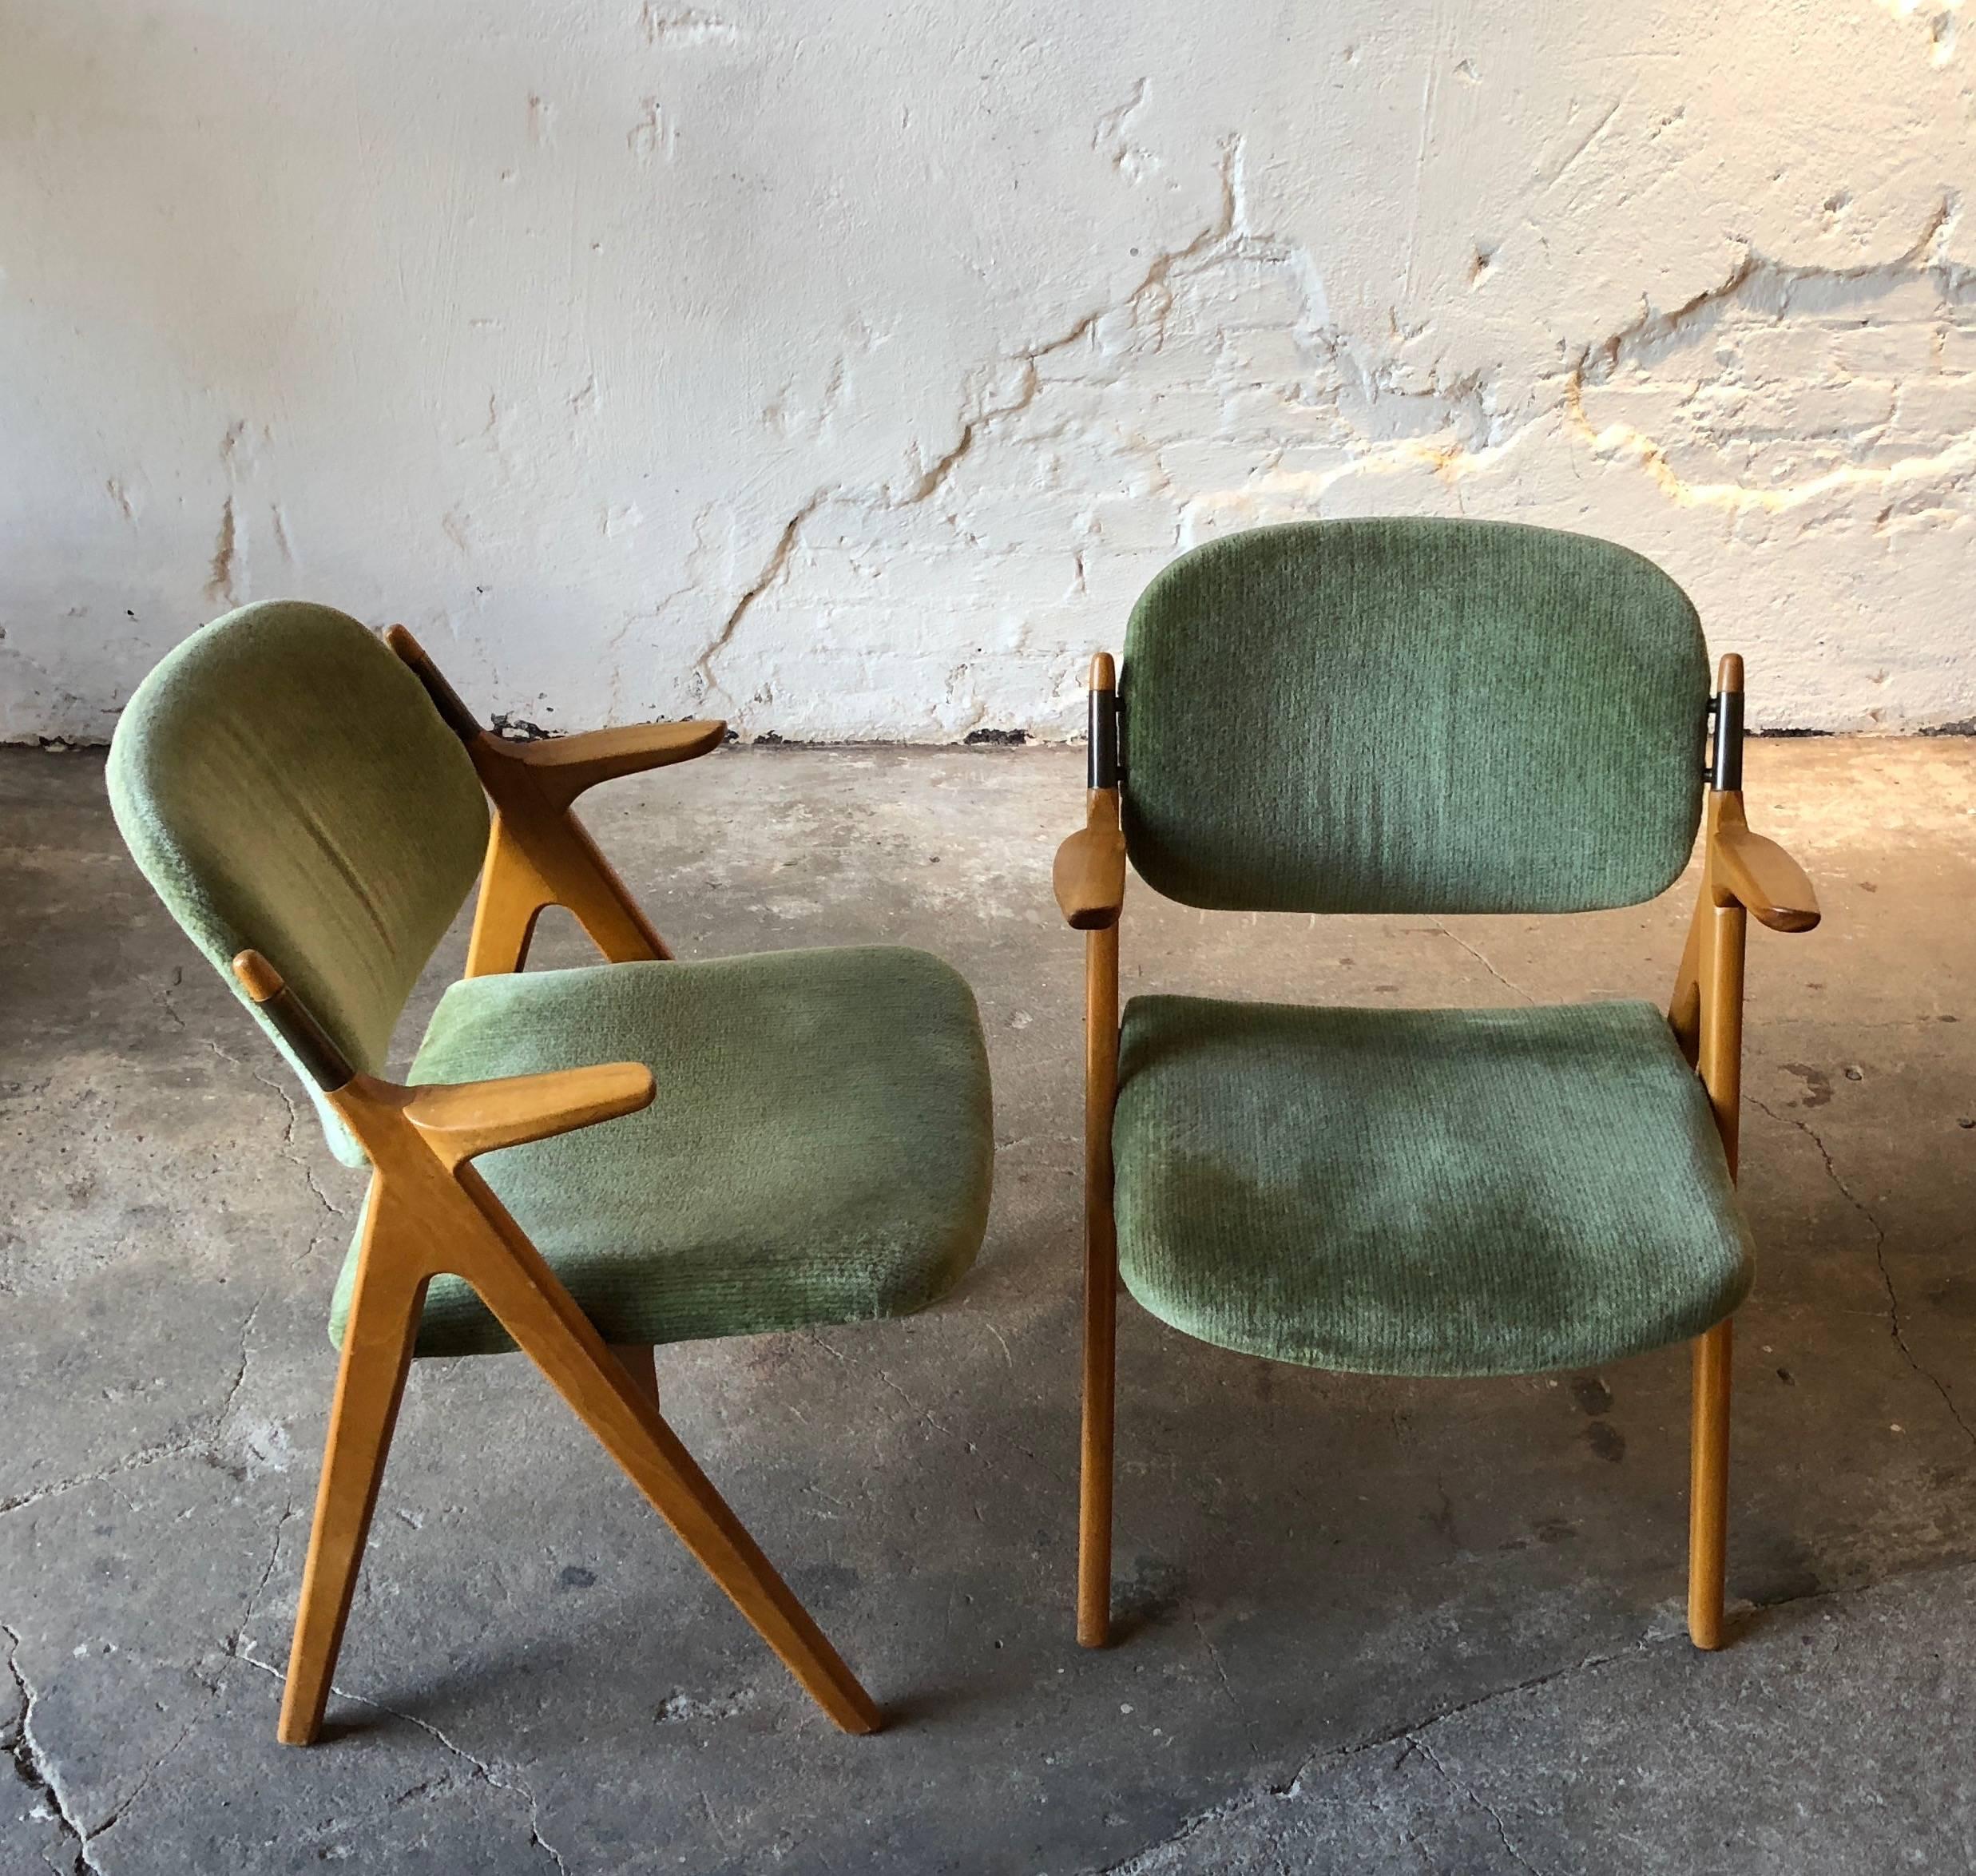 Hand-Carved Scandinavian Modern Armchairs in Birch with Original Upholstery 1950s Vintage For Sale